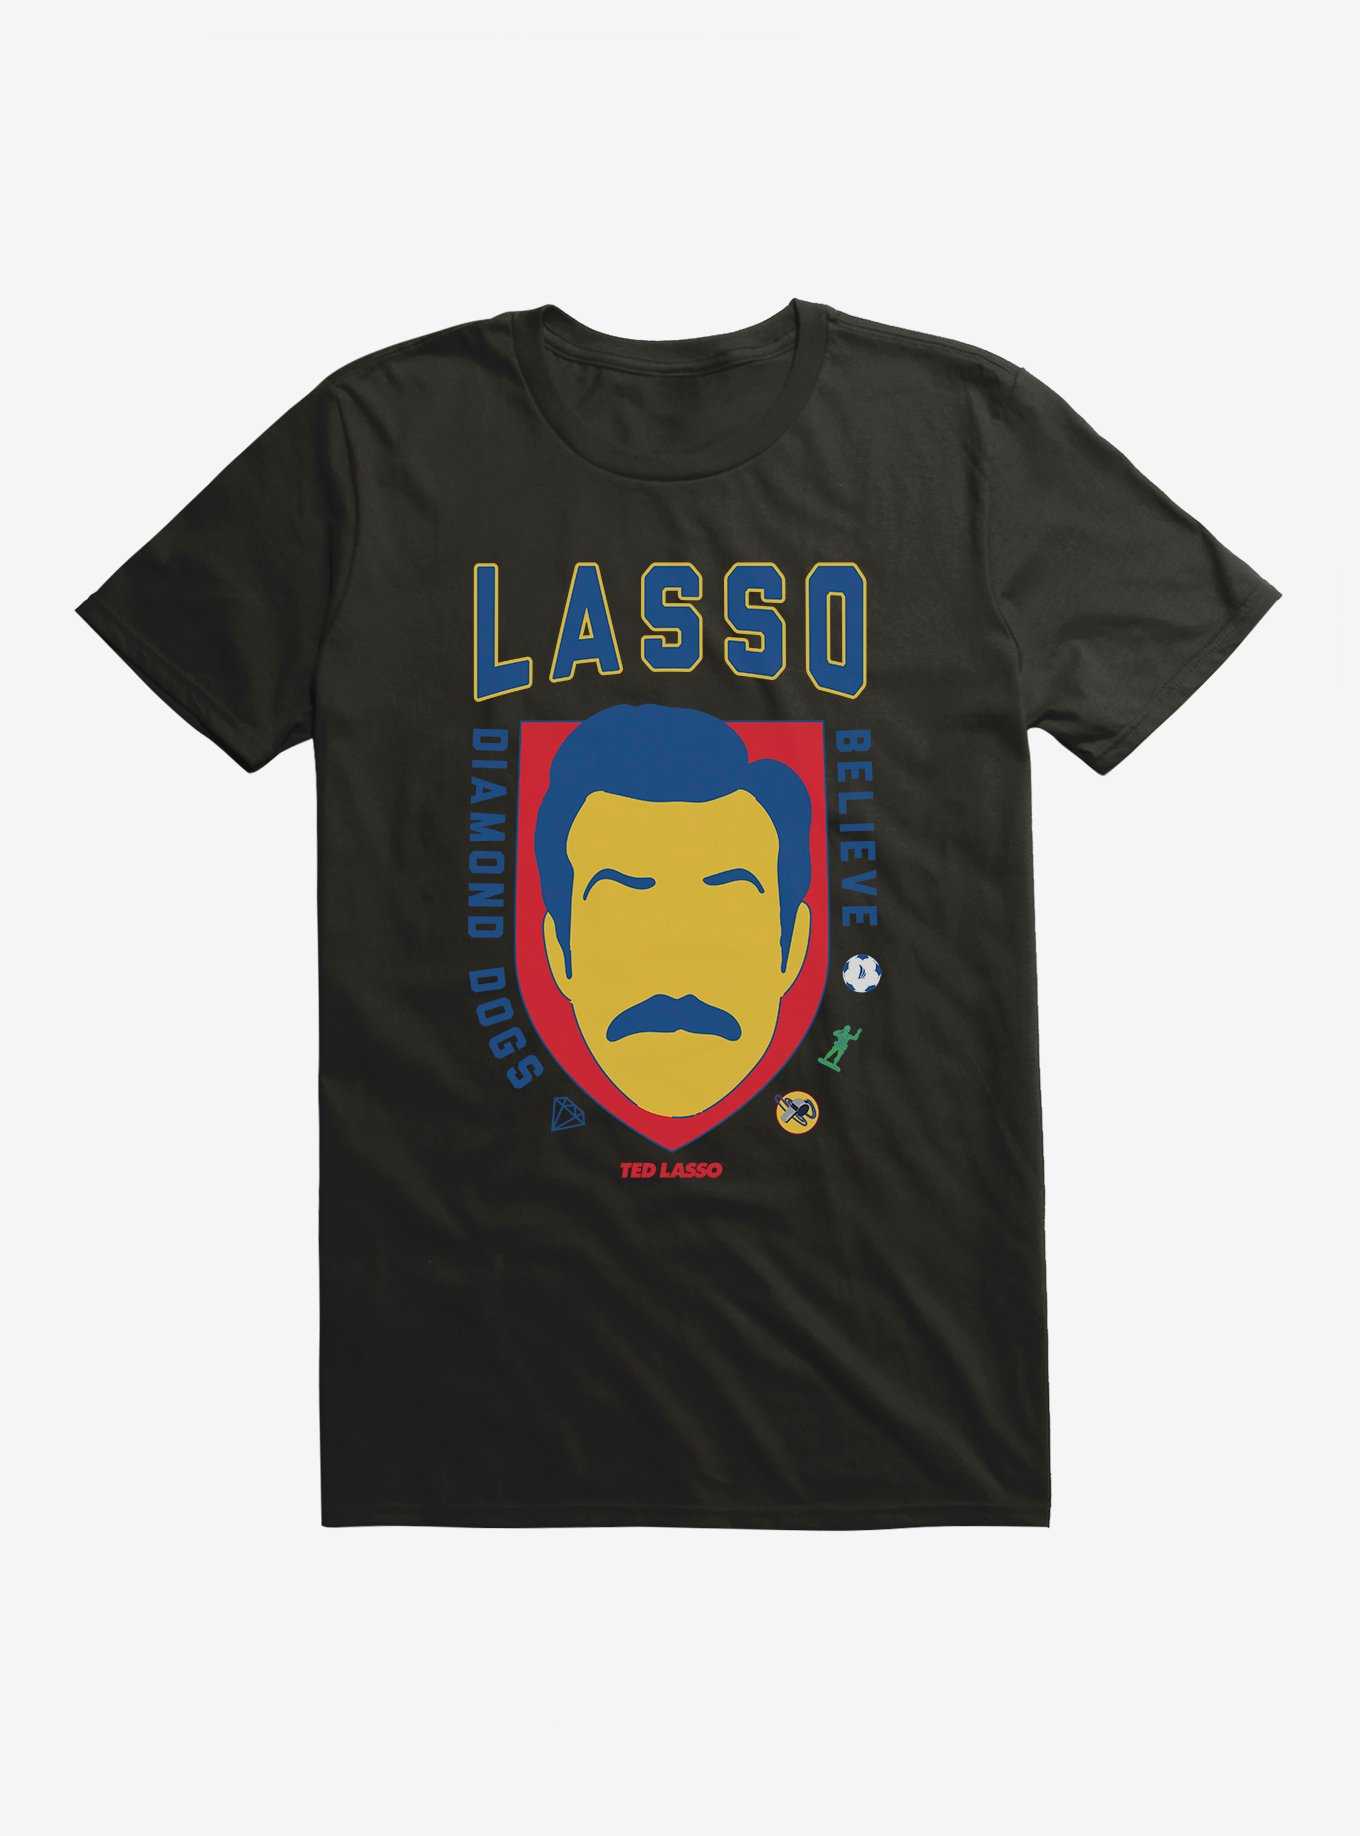 OFFICIAL Ted Lasso Merchandise & Shirts